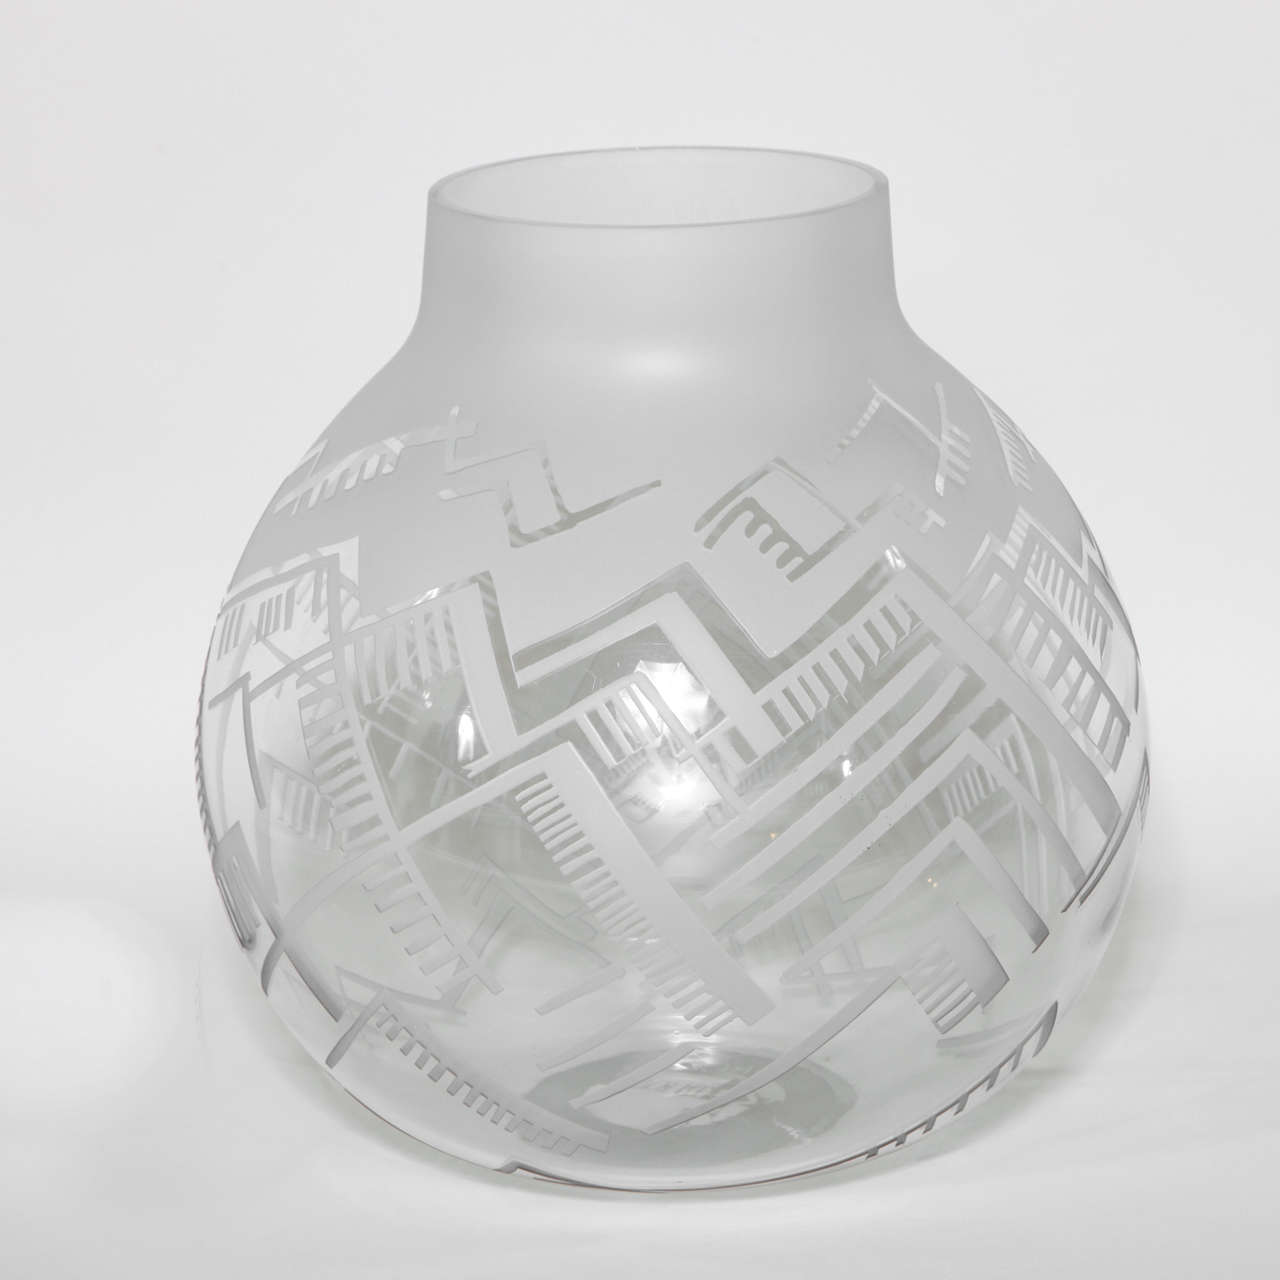 Spherical vase with geometric pattern in frosted and etched glass.
Signed: LACROIX/ 1927 with molded mark.

Boris-Jean Lacroix had a prolific career designing wallpaper, furniture and interiors, and most notably for his Modernist lighting.